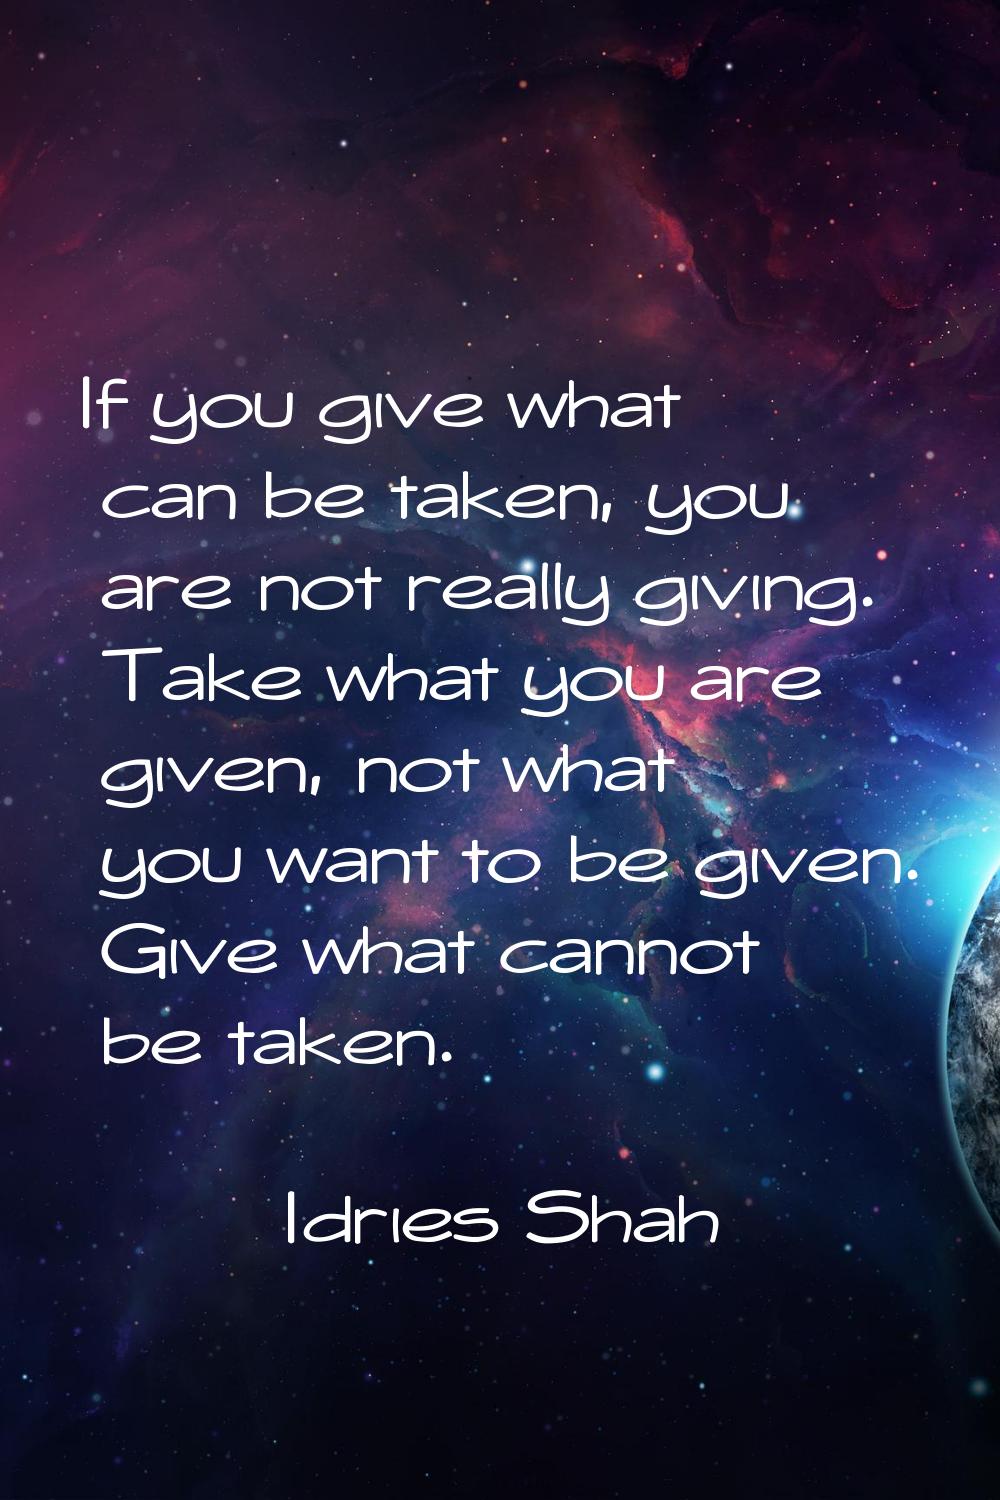 If you give what can be taken, you are not really giving. Take what you are given, not what you wan